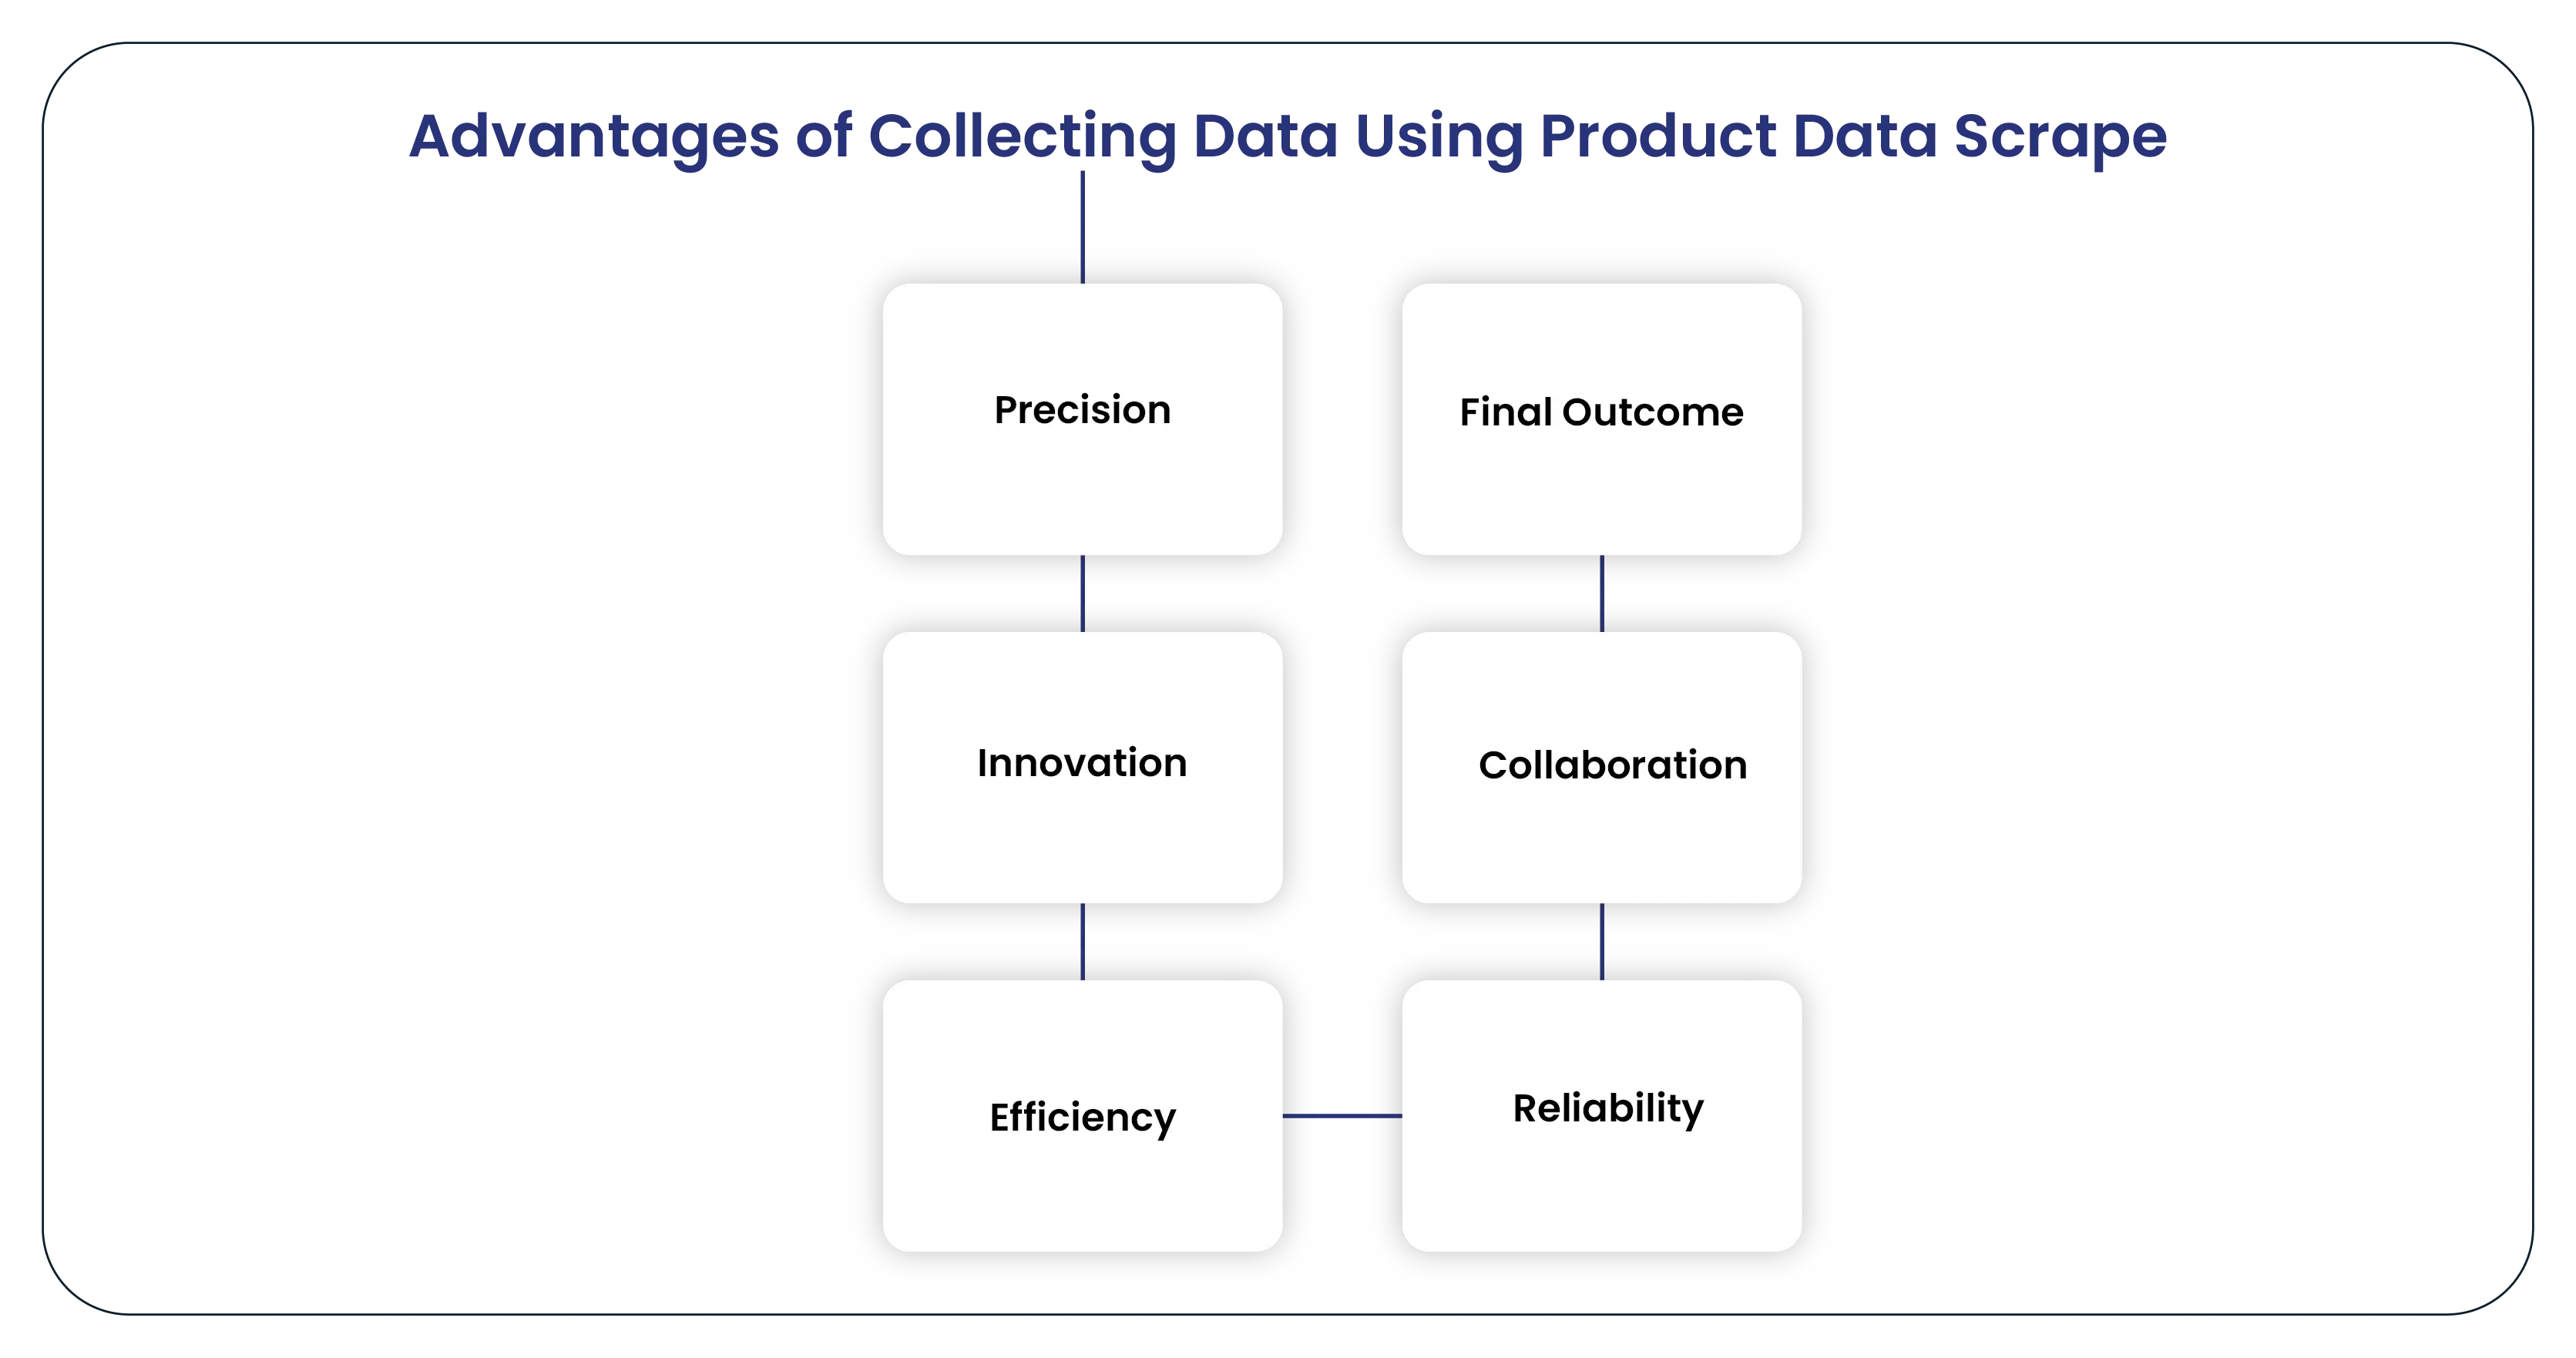 Advantages of Collecting Data Using Product Data Scrape-01